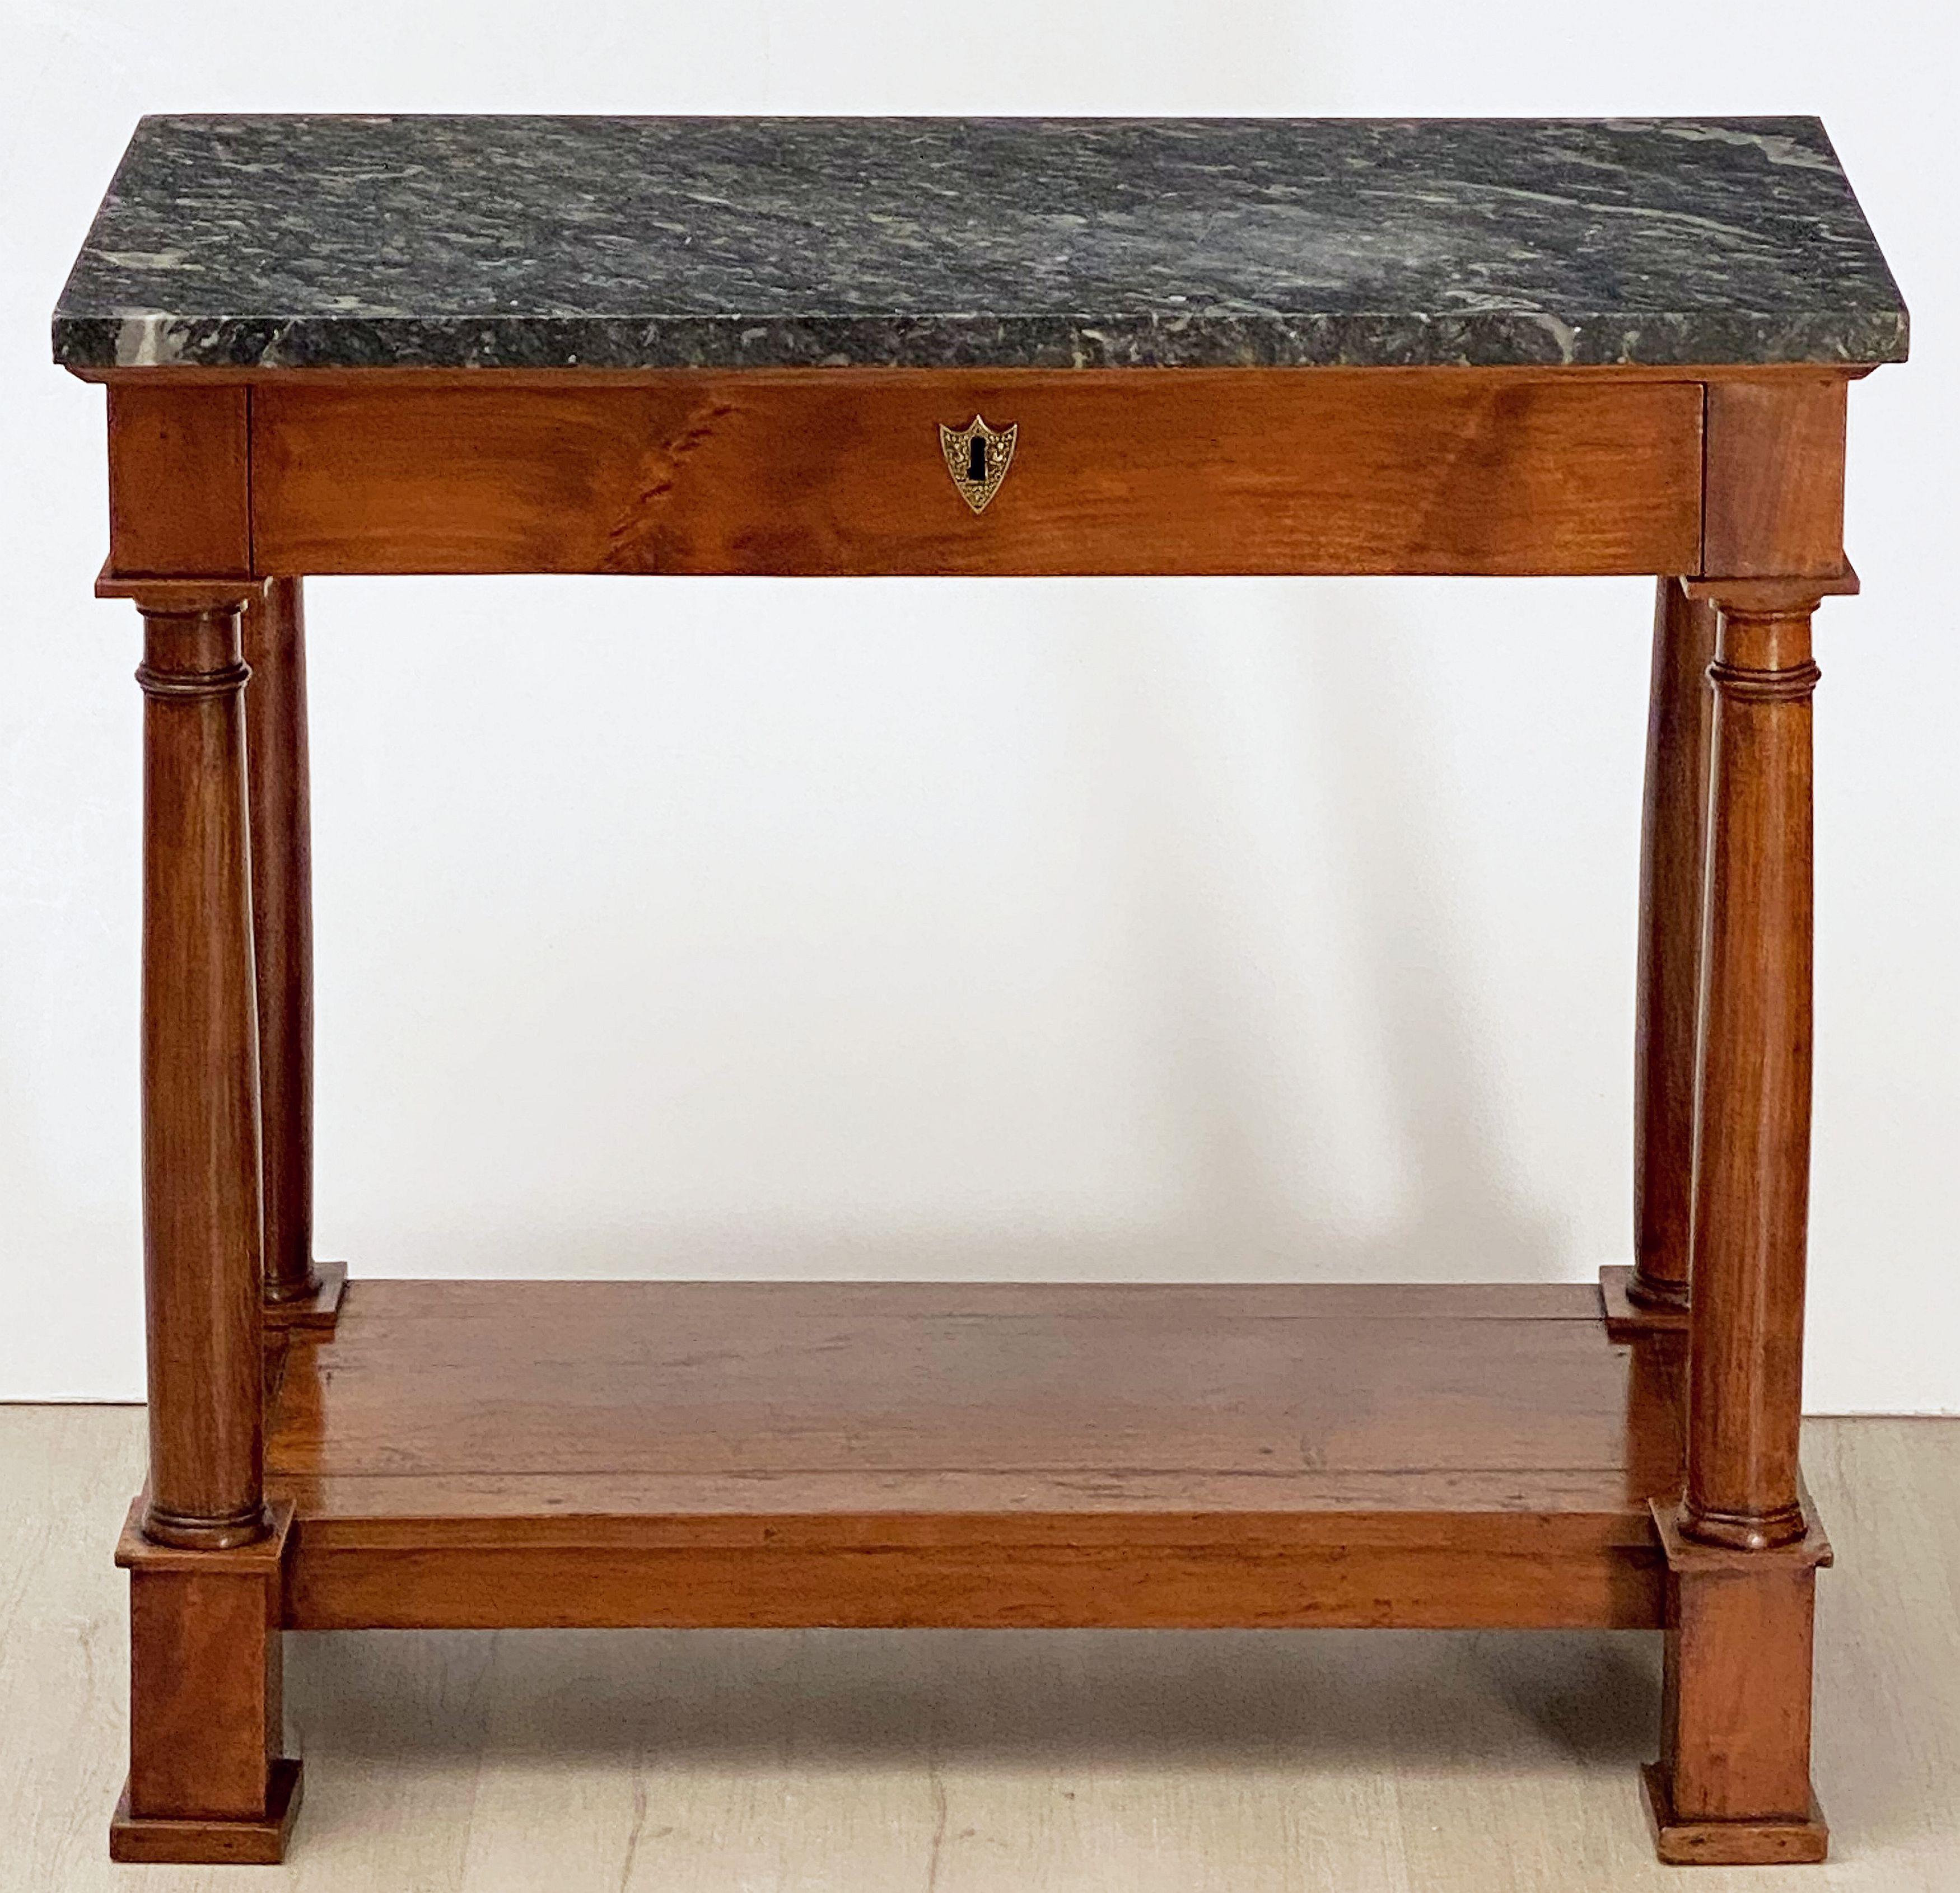 A period French Empire console table of mahogany of fine proportions, featuring a rectangular figured marble top set upon a frieze with one long drawer, the drawer with brass escutcheon, over a base with four turned column supports, bottom shelf,